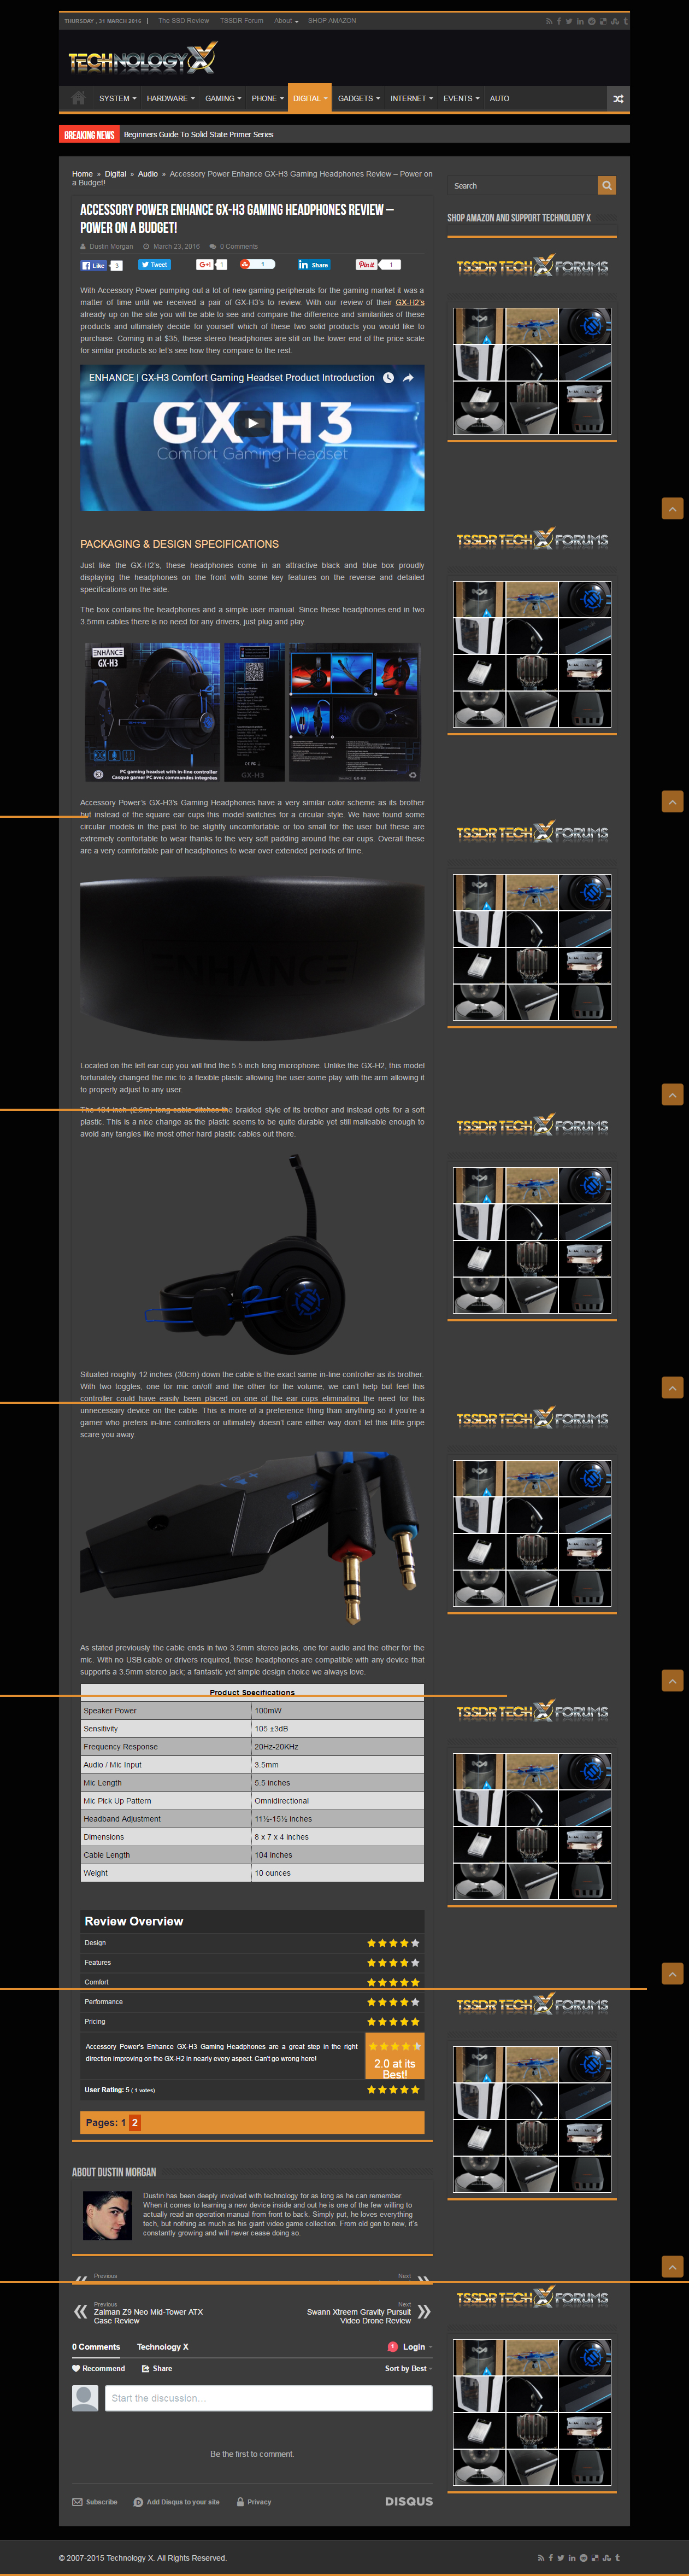 technologyx reviews the gx-h3 gaming headset